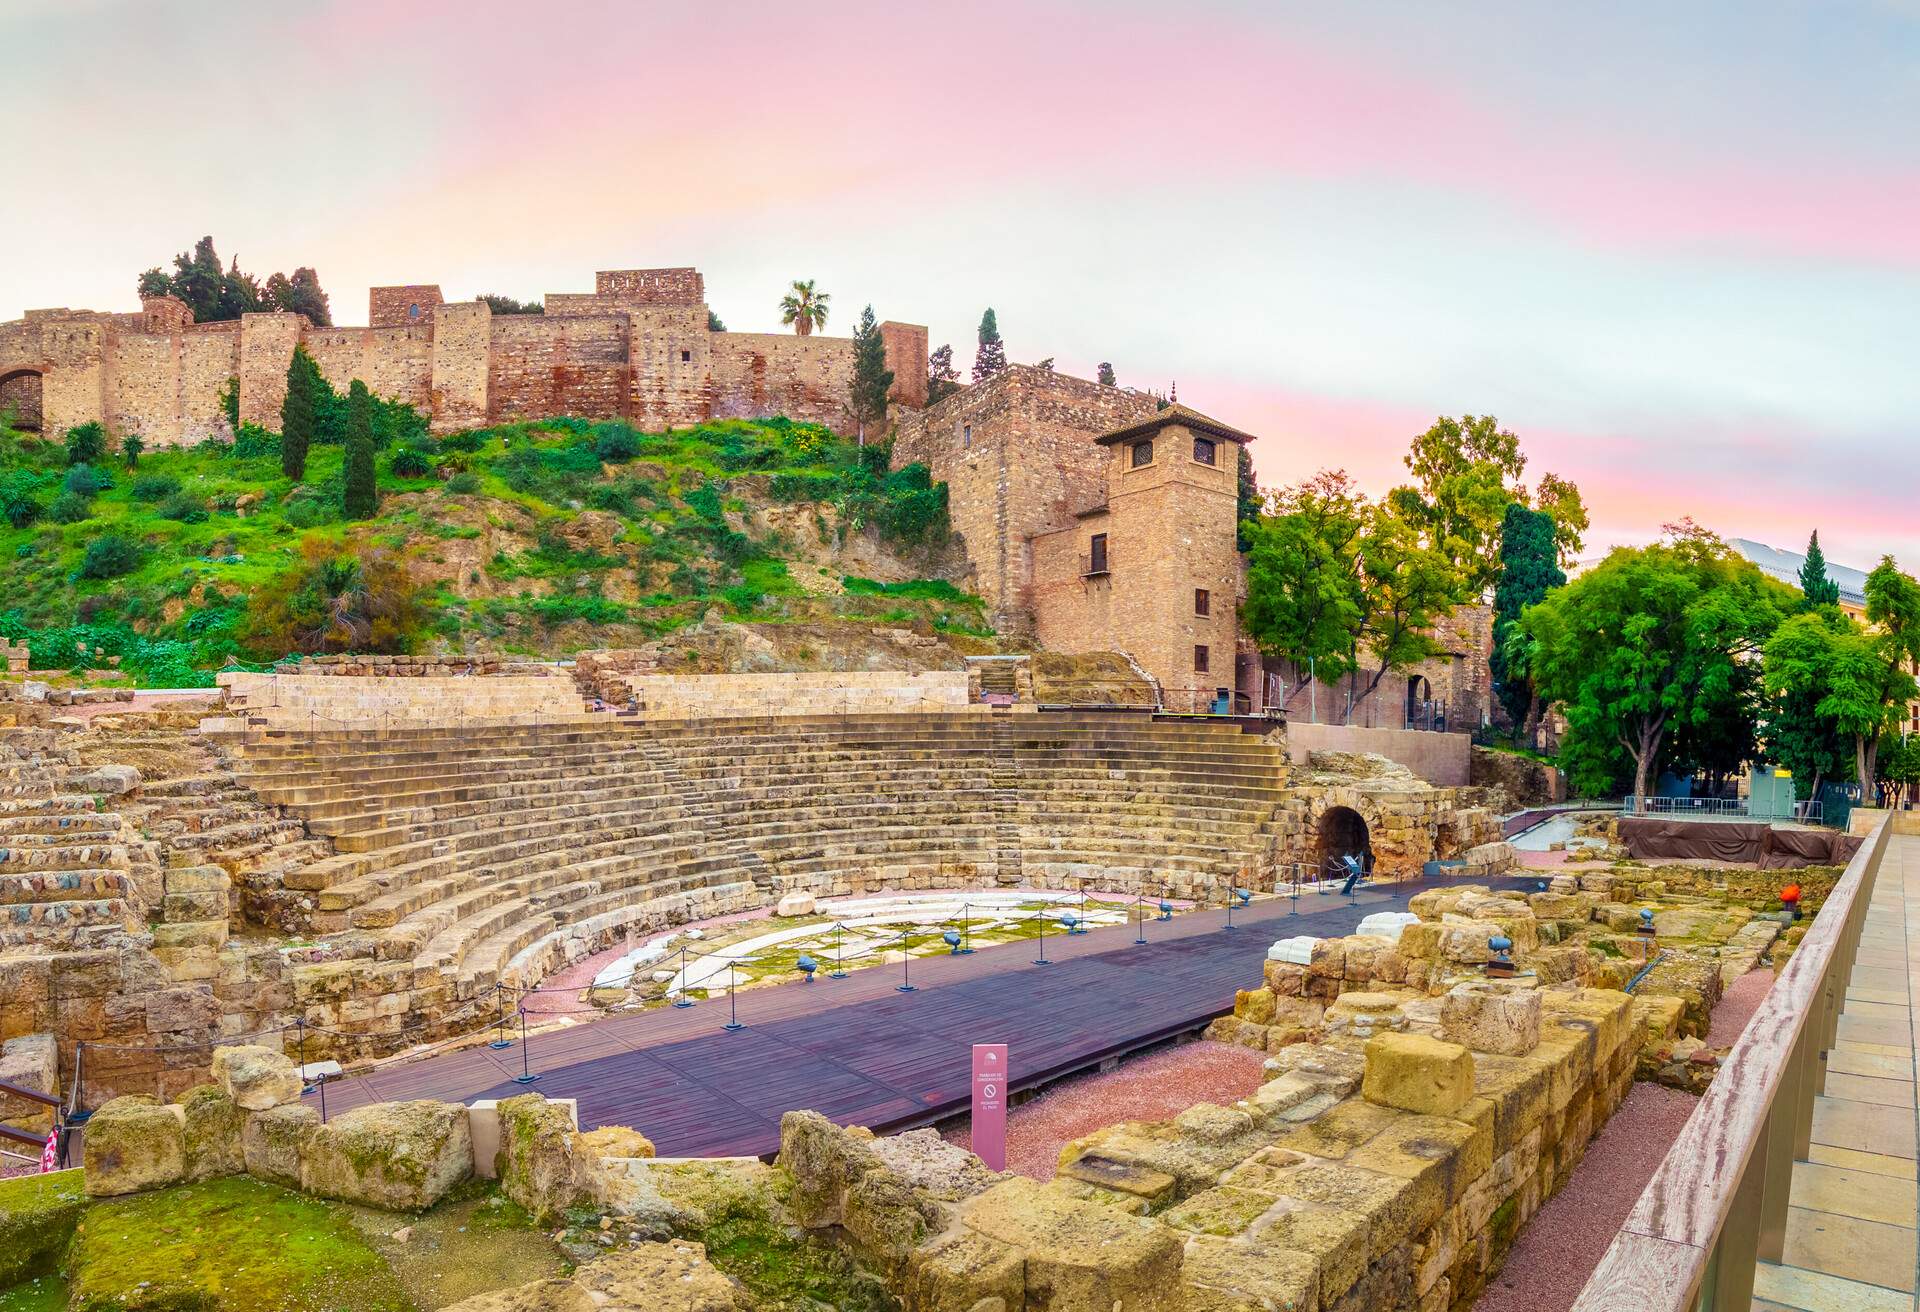 The Alcazaba of Malaga was build in the XI century and is a Moorish fortification with a roman theater adjacent to its walls.